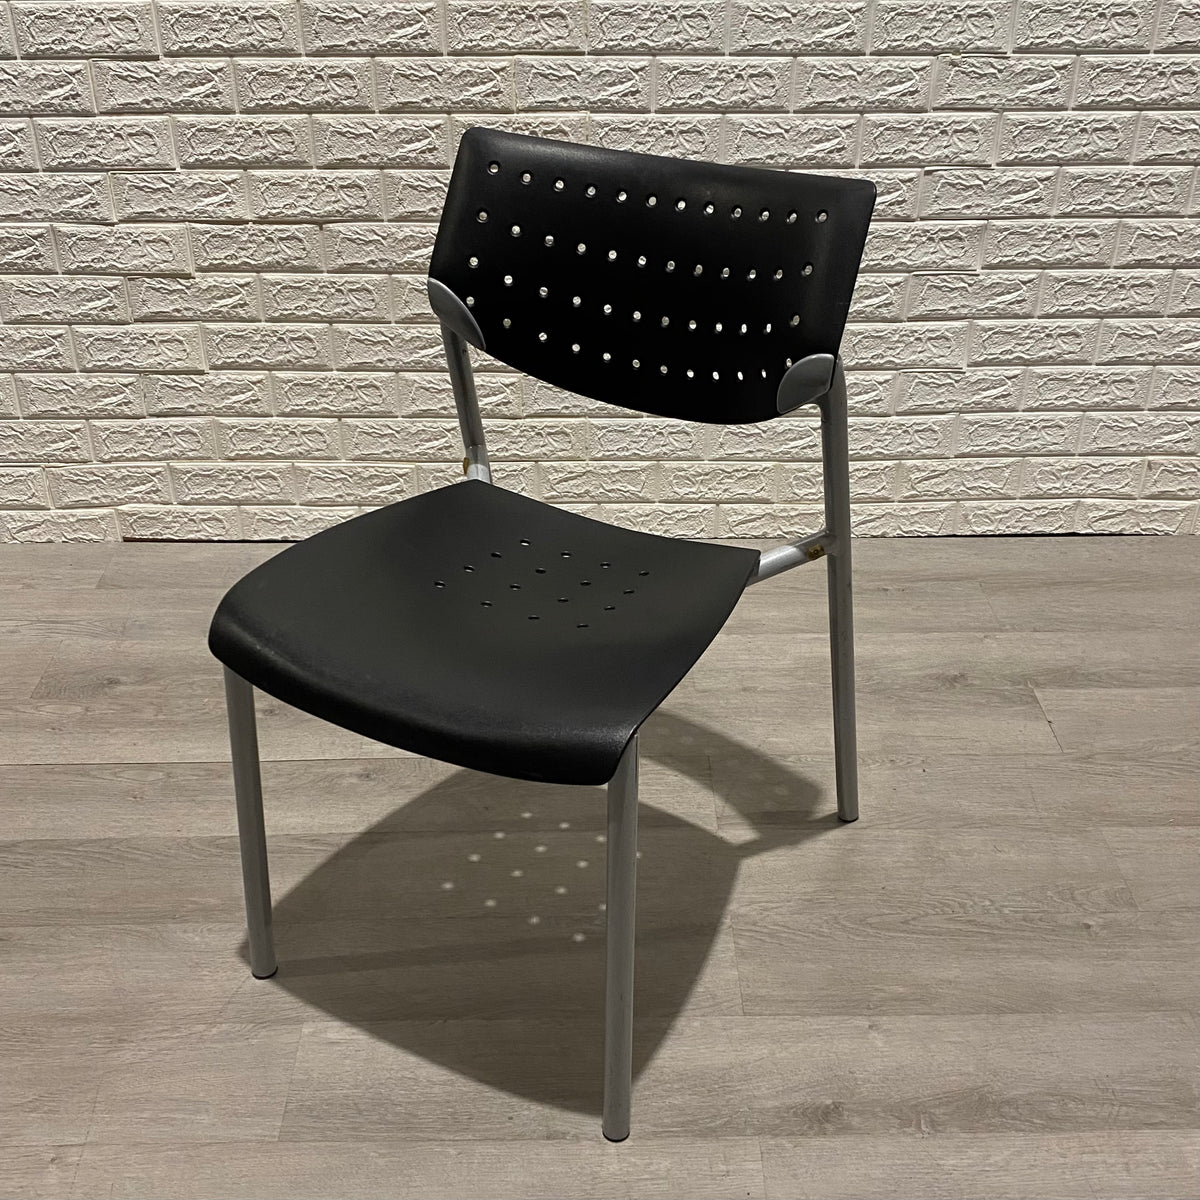 Pre-Owned Kielhauer Stack Chairs - Black and Silver - Duckys Office Furniture